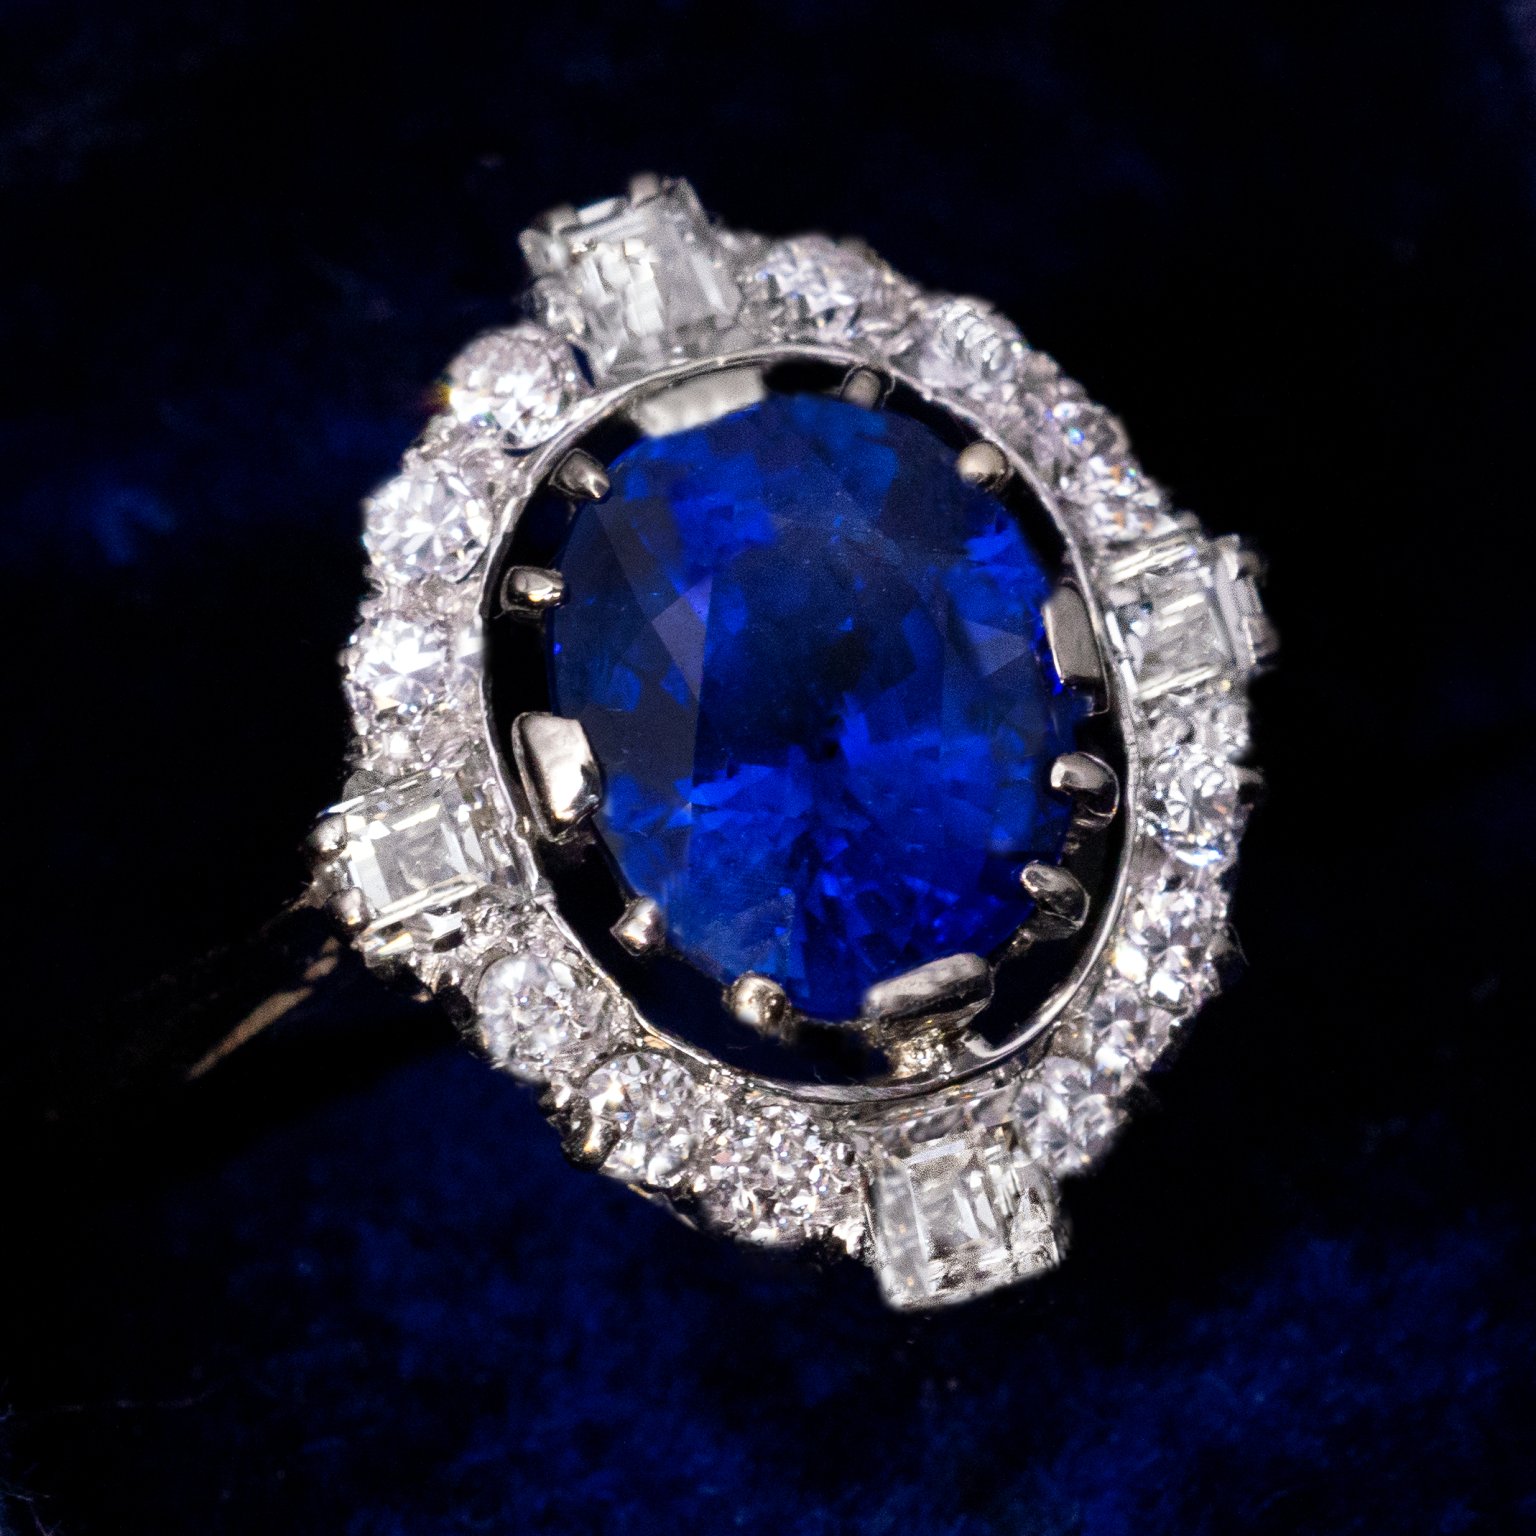 Sapphire Engagement Rings - Antique Jewelry | Vintage Rings | Faberge ...